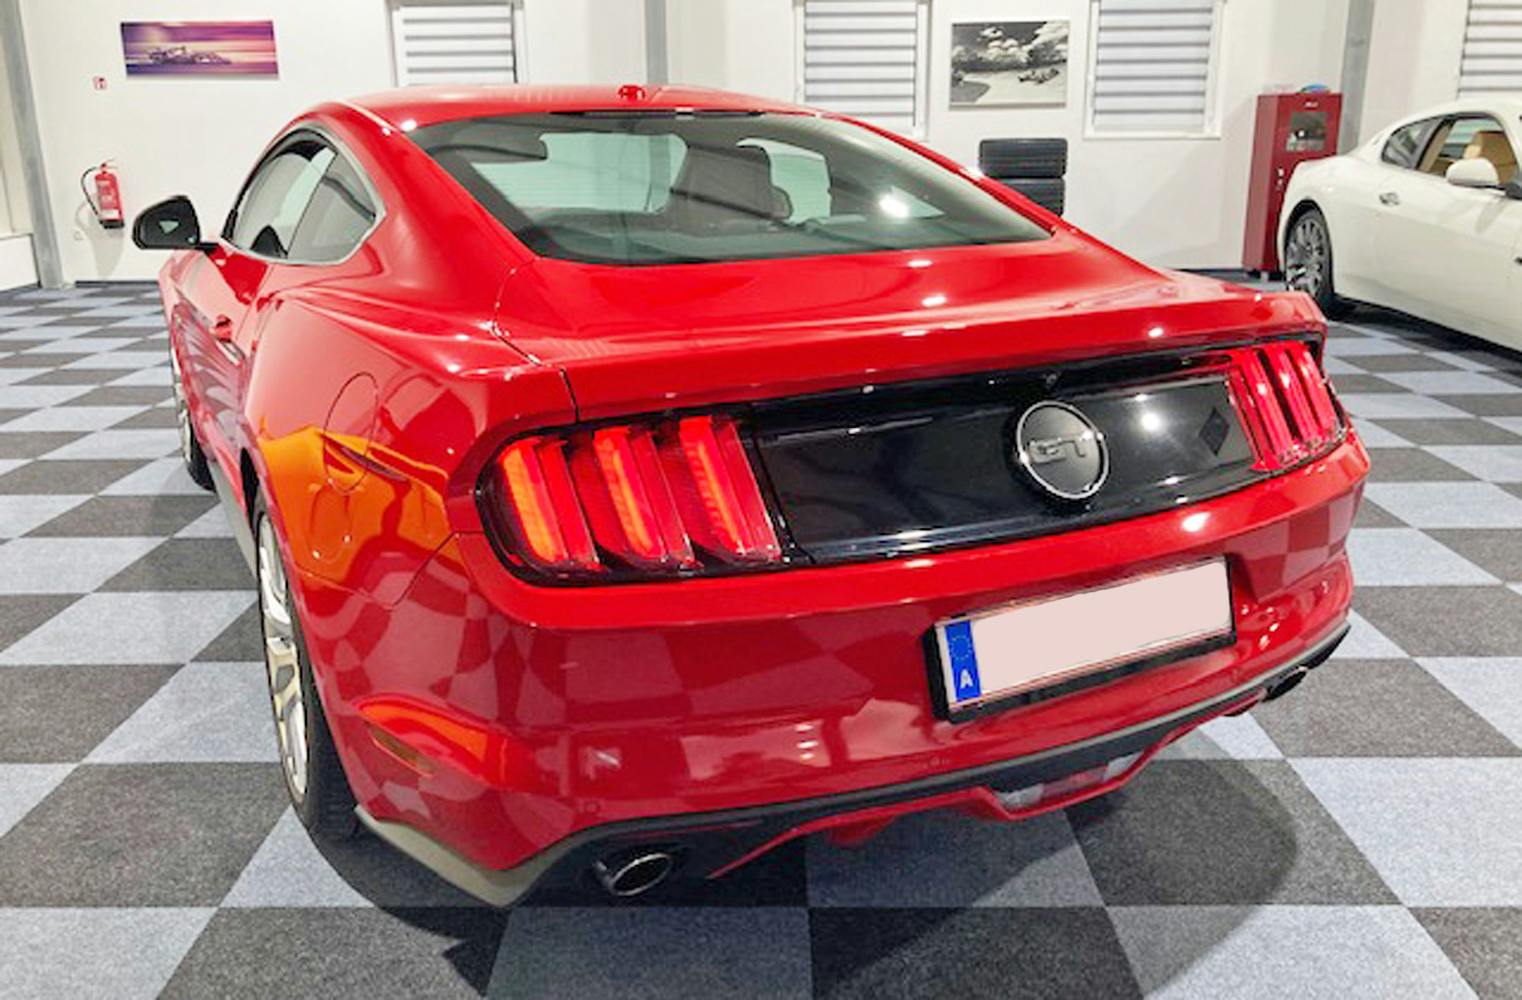 Ford Mustang GT V8 mieten | US-Legende mit 421 PS | 1 Tag